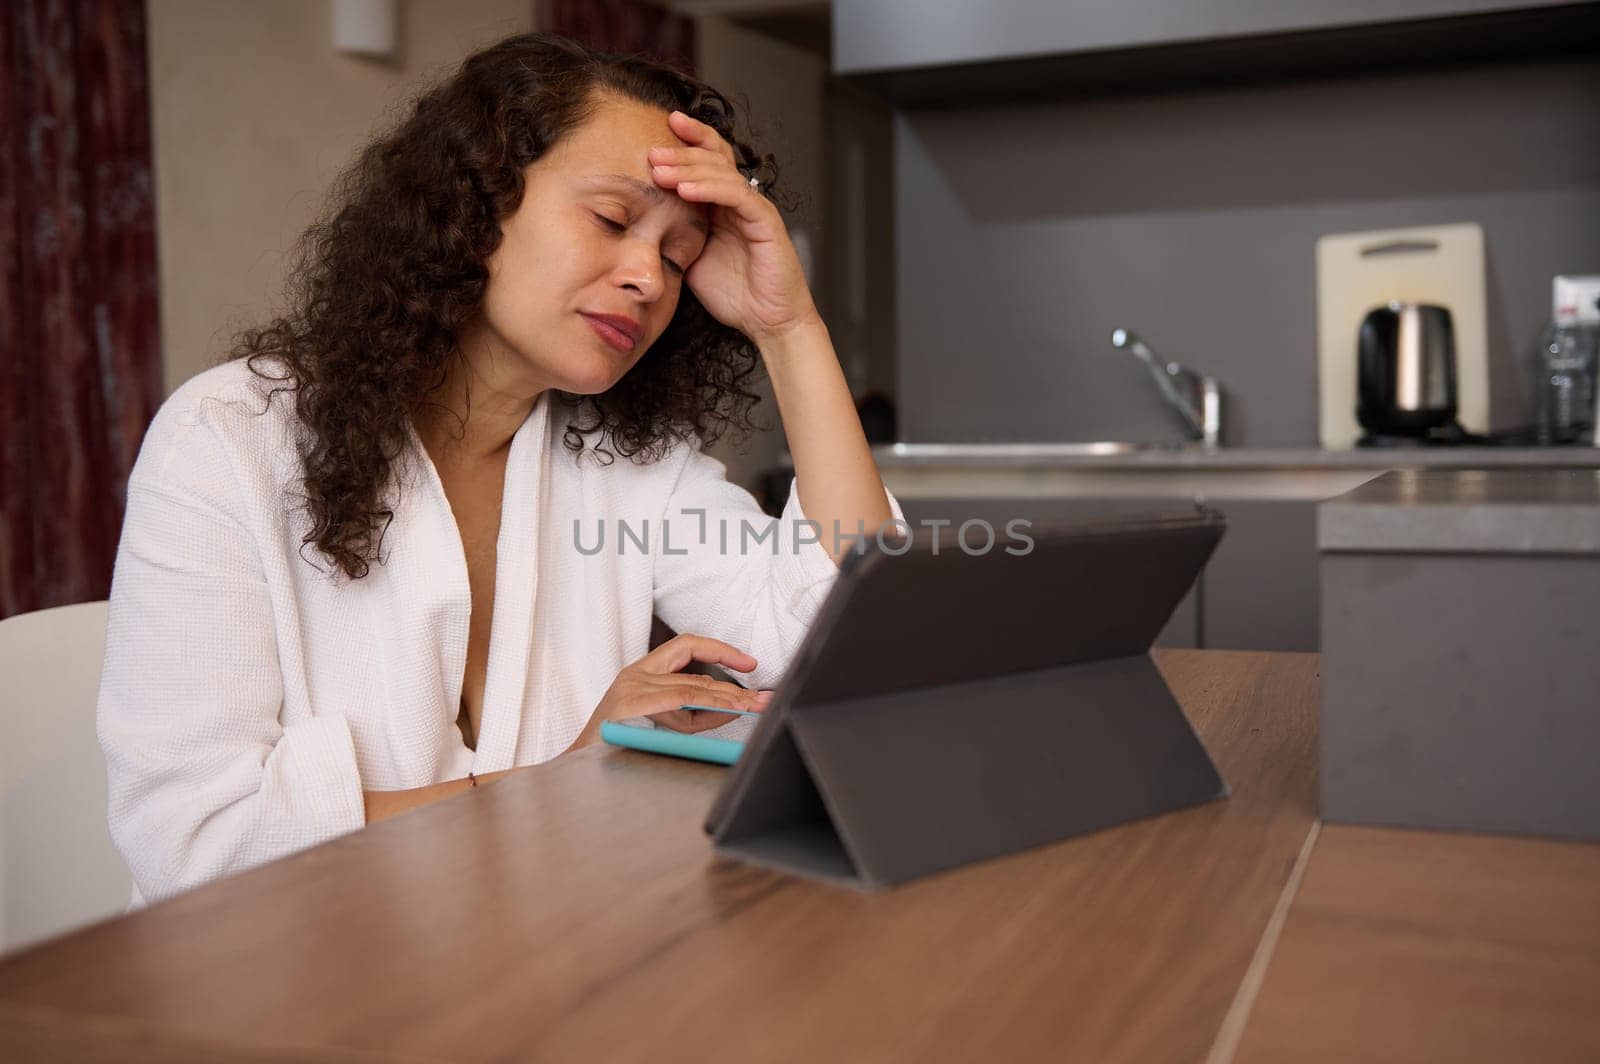 Tired business woman in white bathrobe at home, working online on tablet, reading email with bad news, suffering from burnout, sitting at kitchen table. Young female boss dealing with work problem by artgf